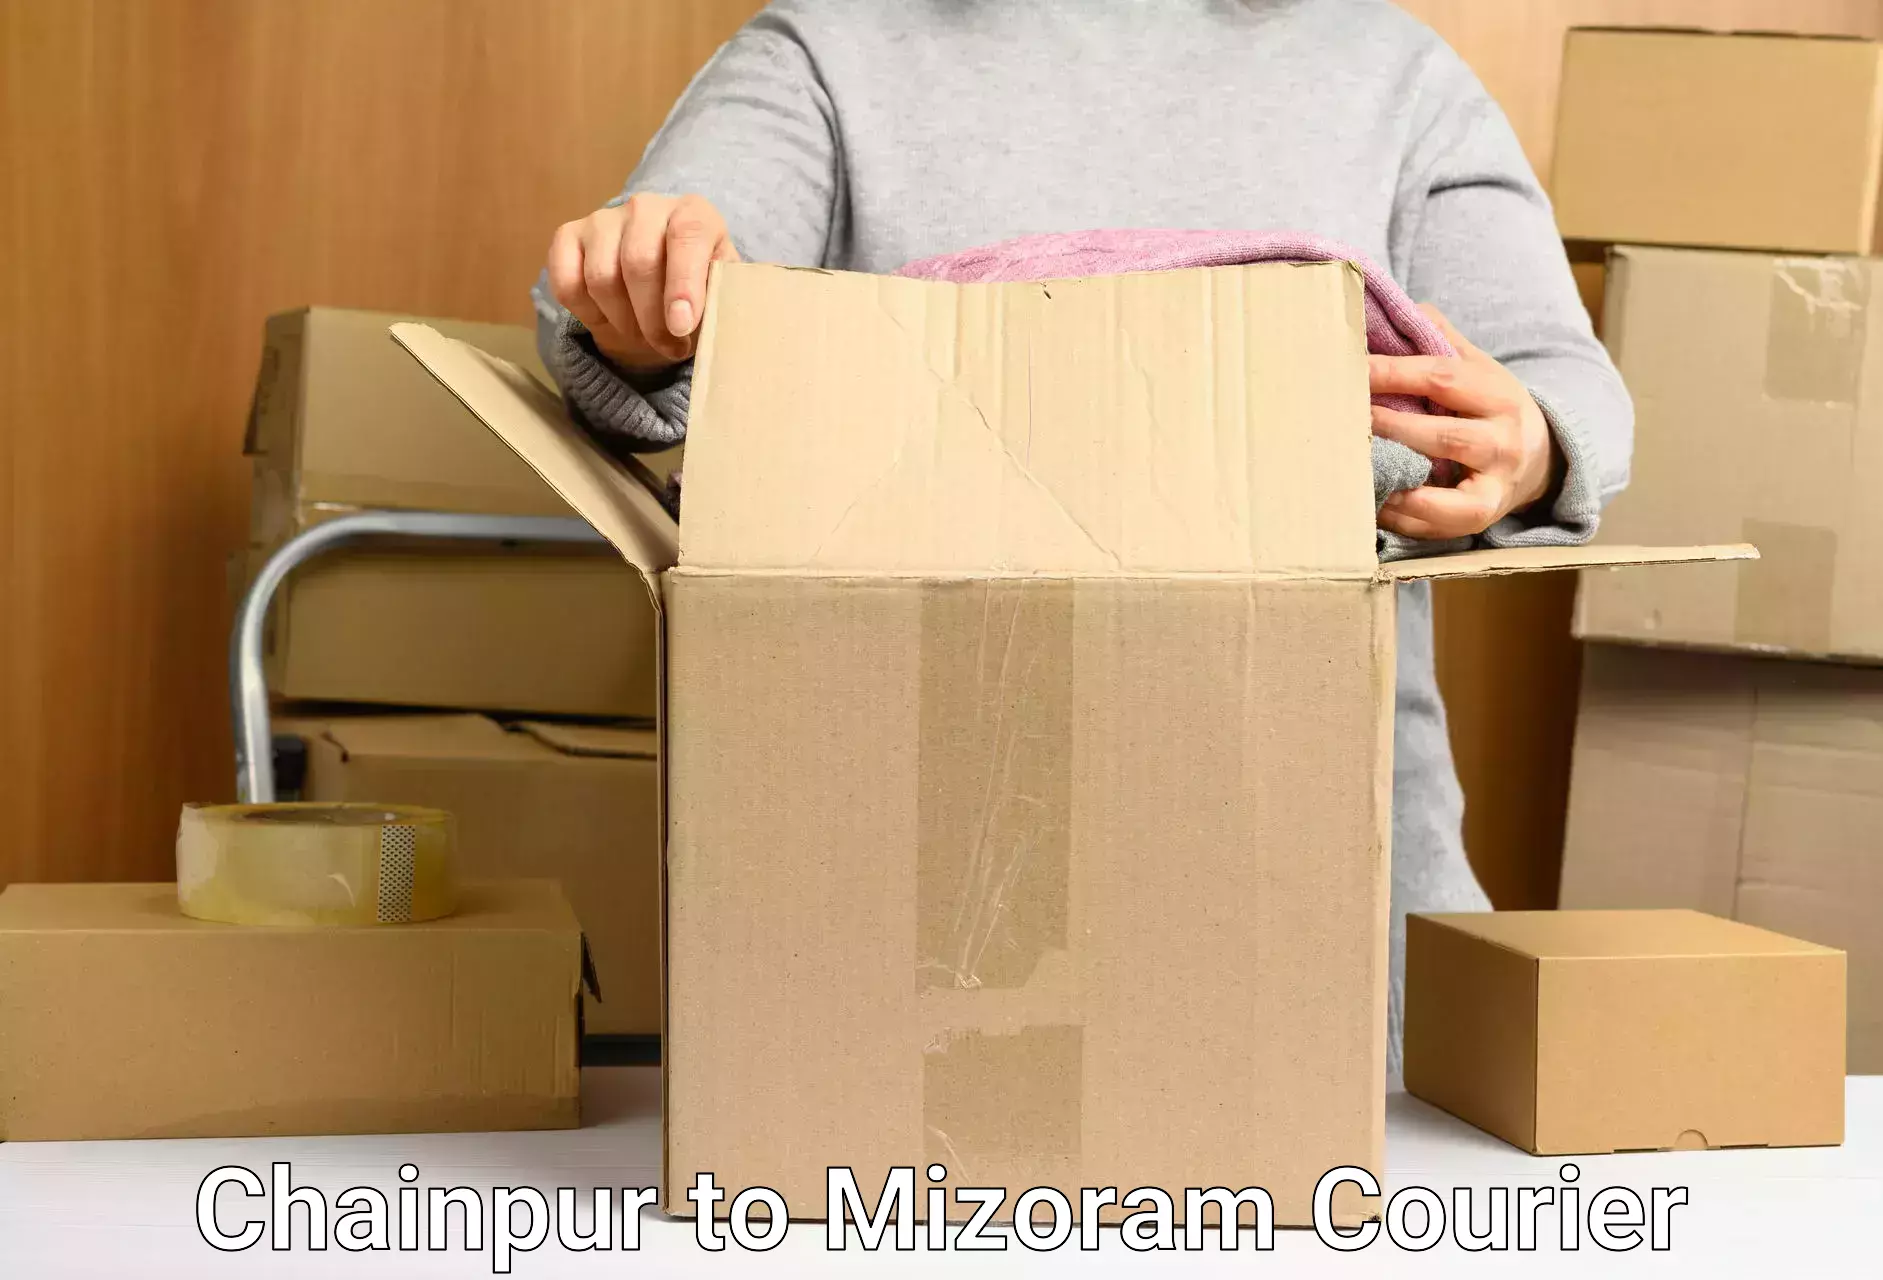 Full-service courier options Chainpur to Mizoram